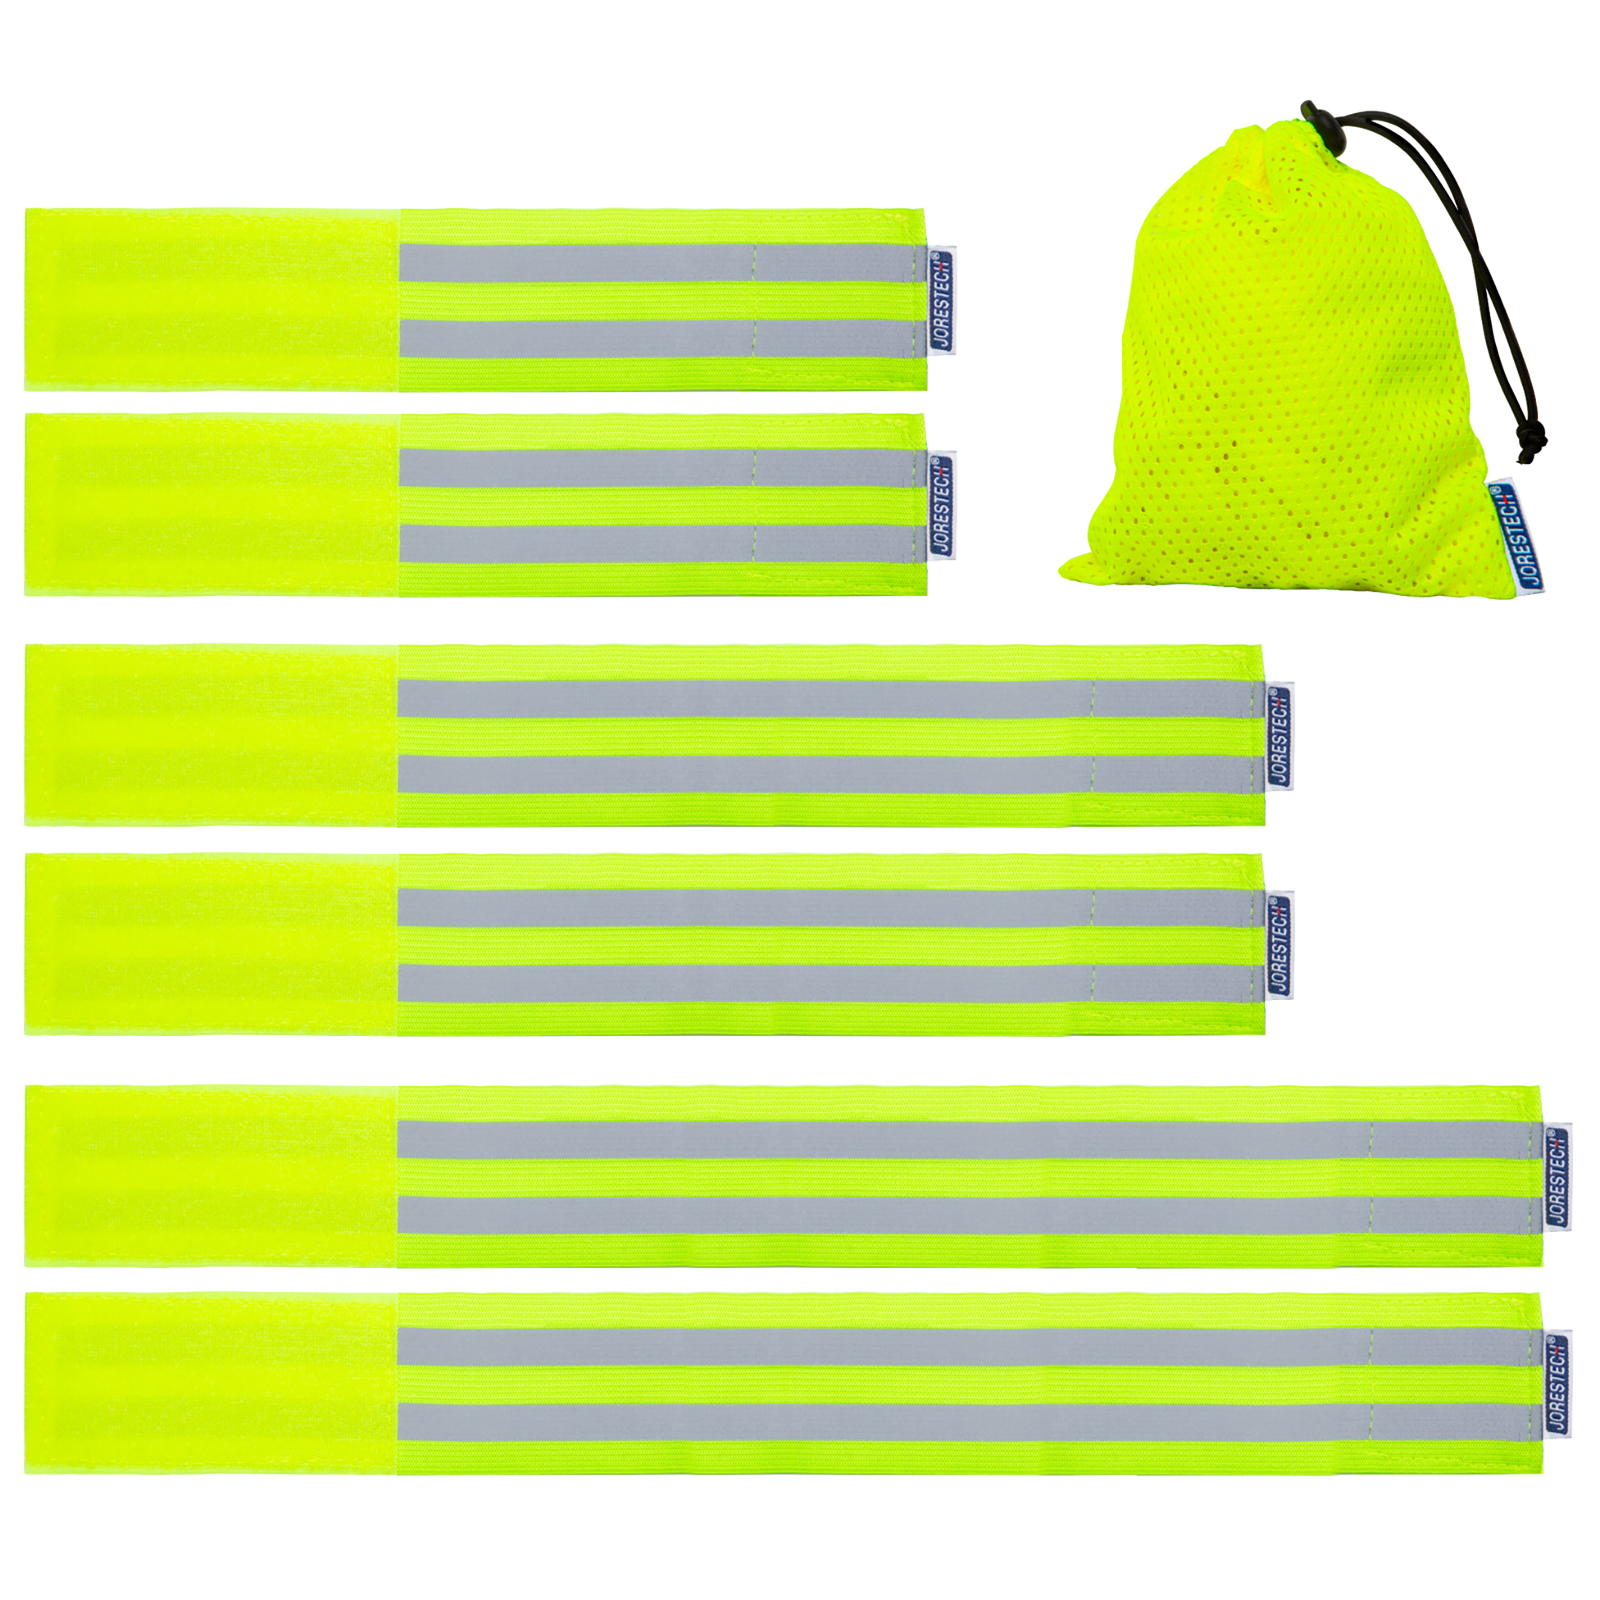 6 Hi vis reflective safety bands of different sizes and a small mesh bag for storage and transportation